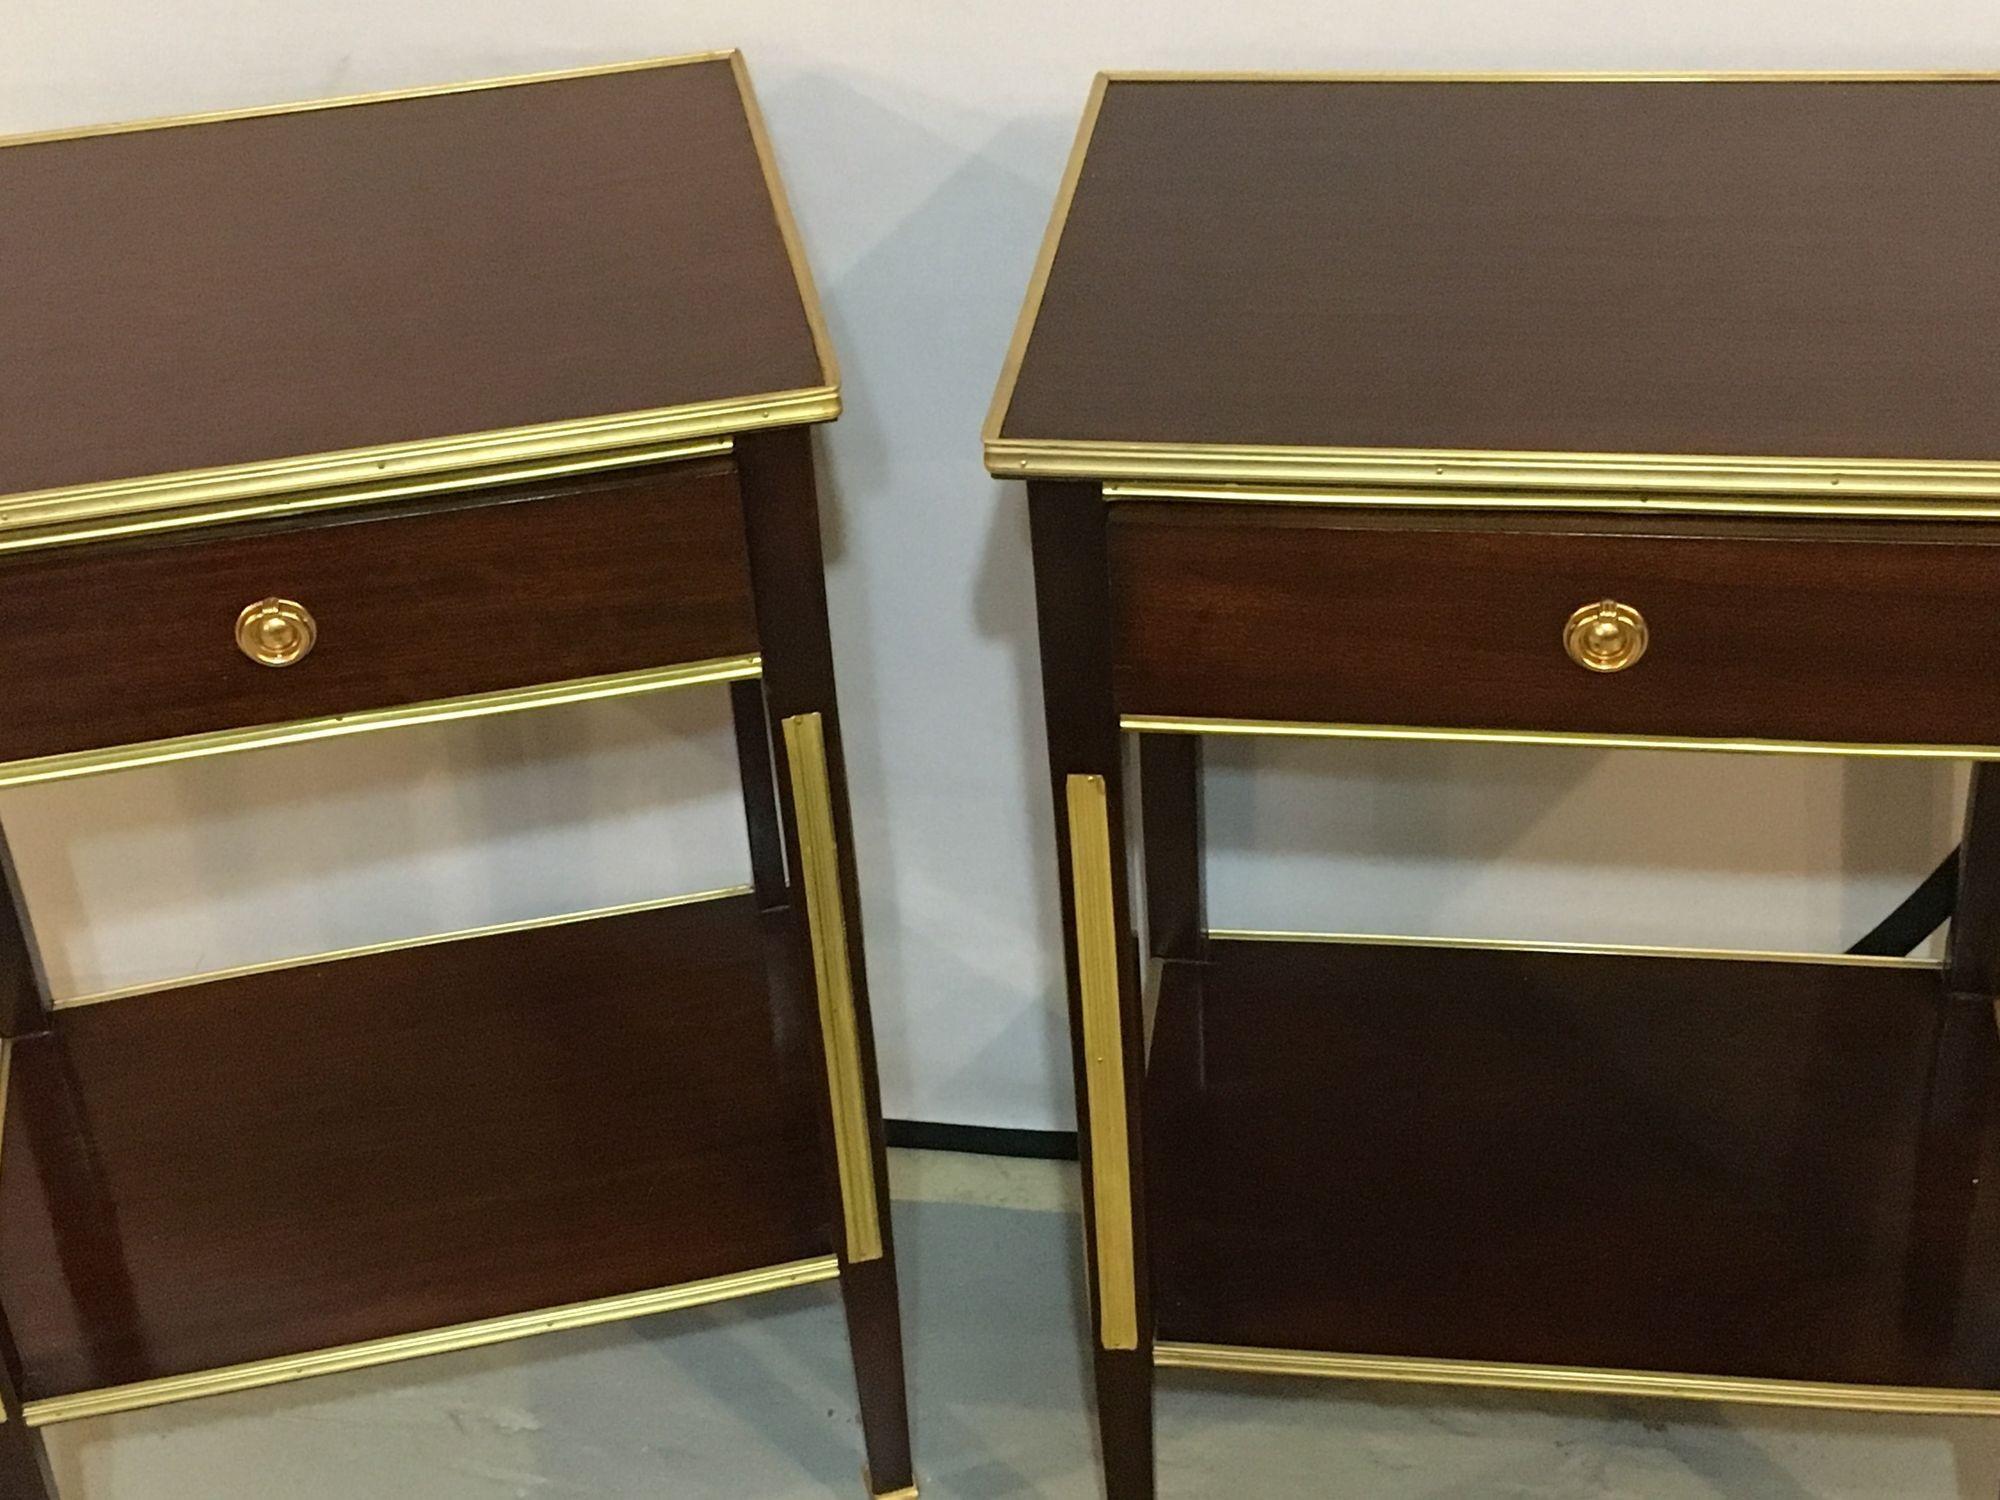 Pair of one drawer Russian style bronze-mounted end tables or night stands. Having been professionally polished and touched up this fine pair of Russian inspired tables are reminiscent of the Maison Jansen style that ruled the day in the late